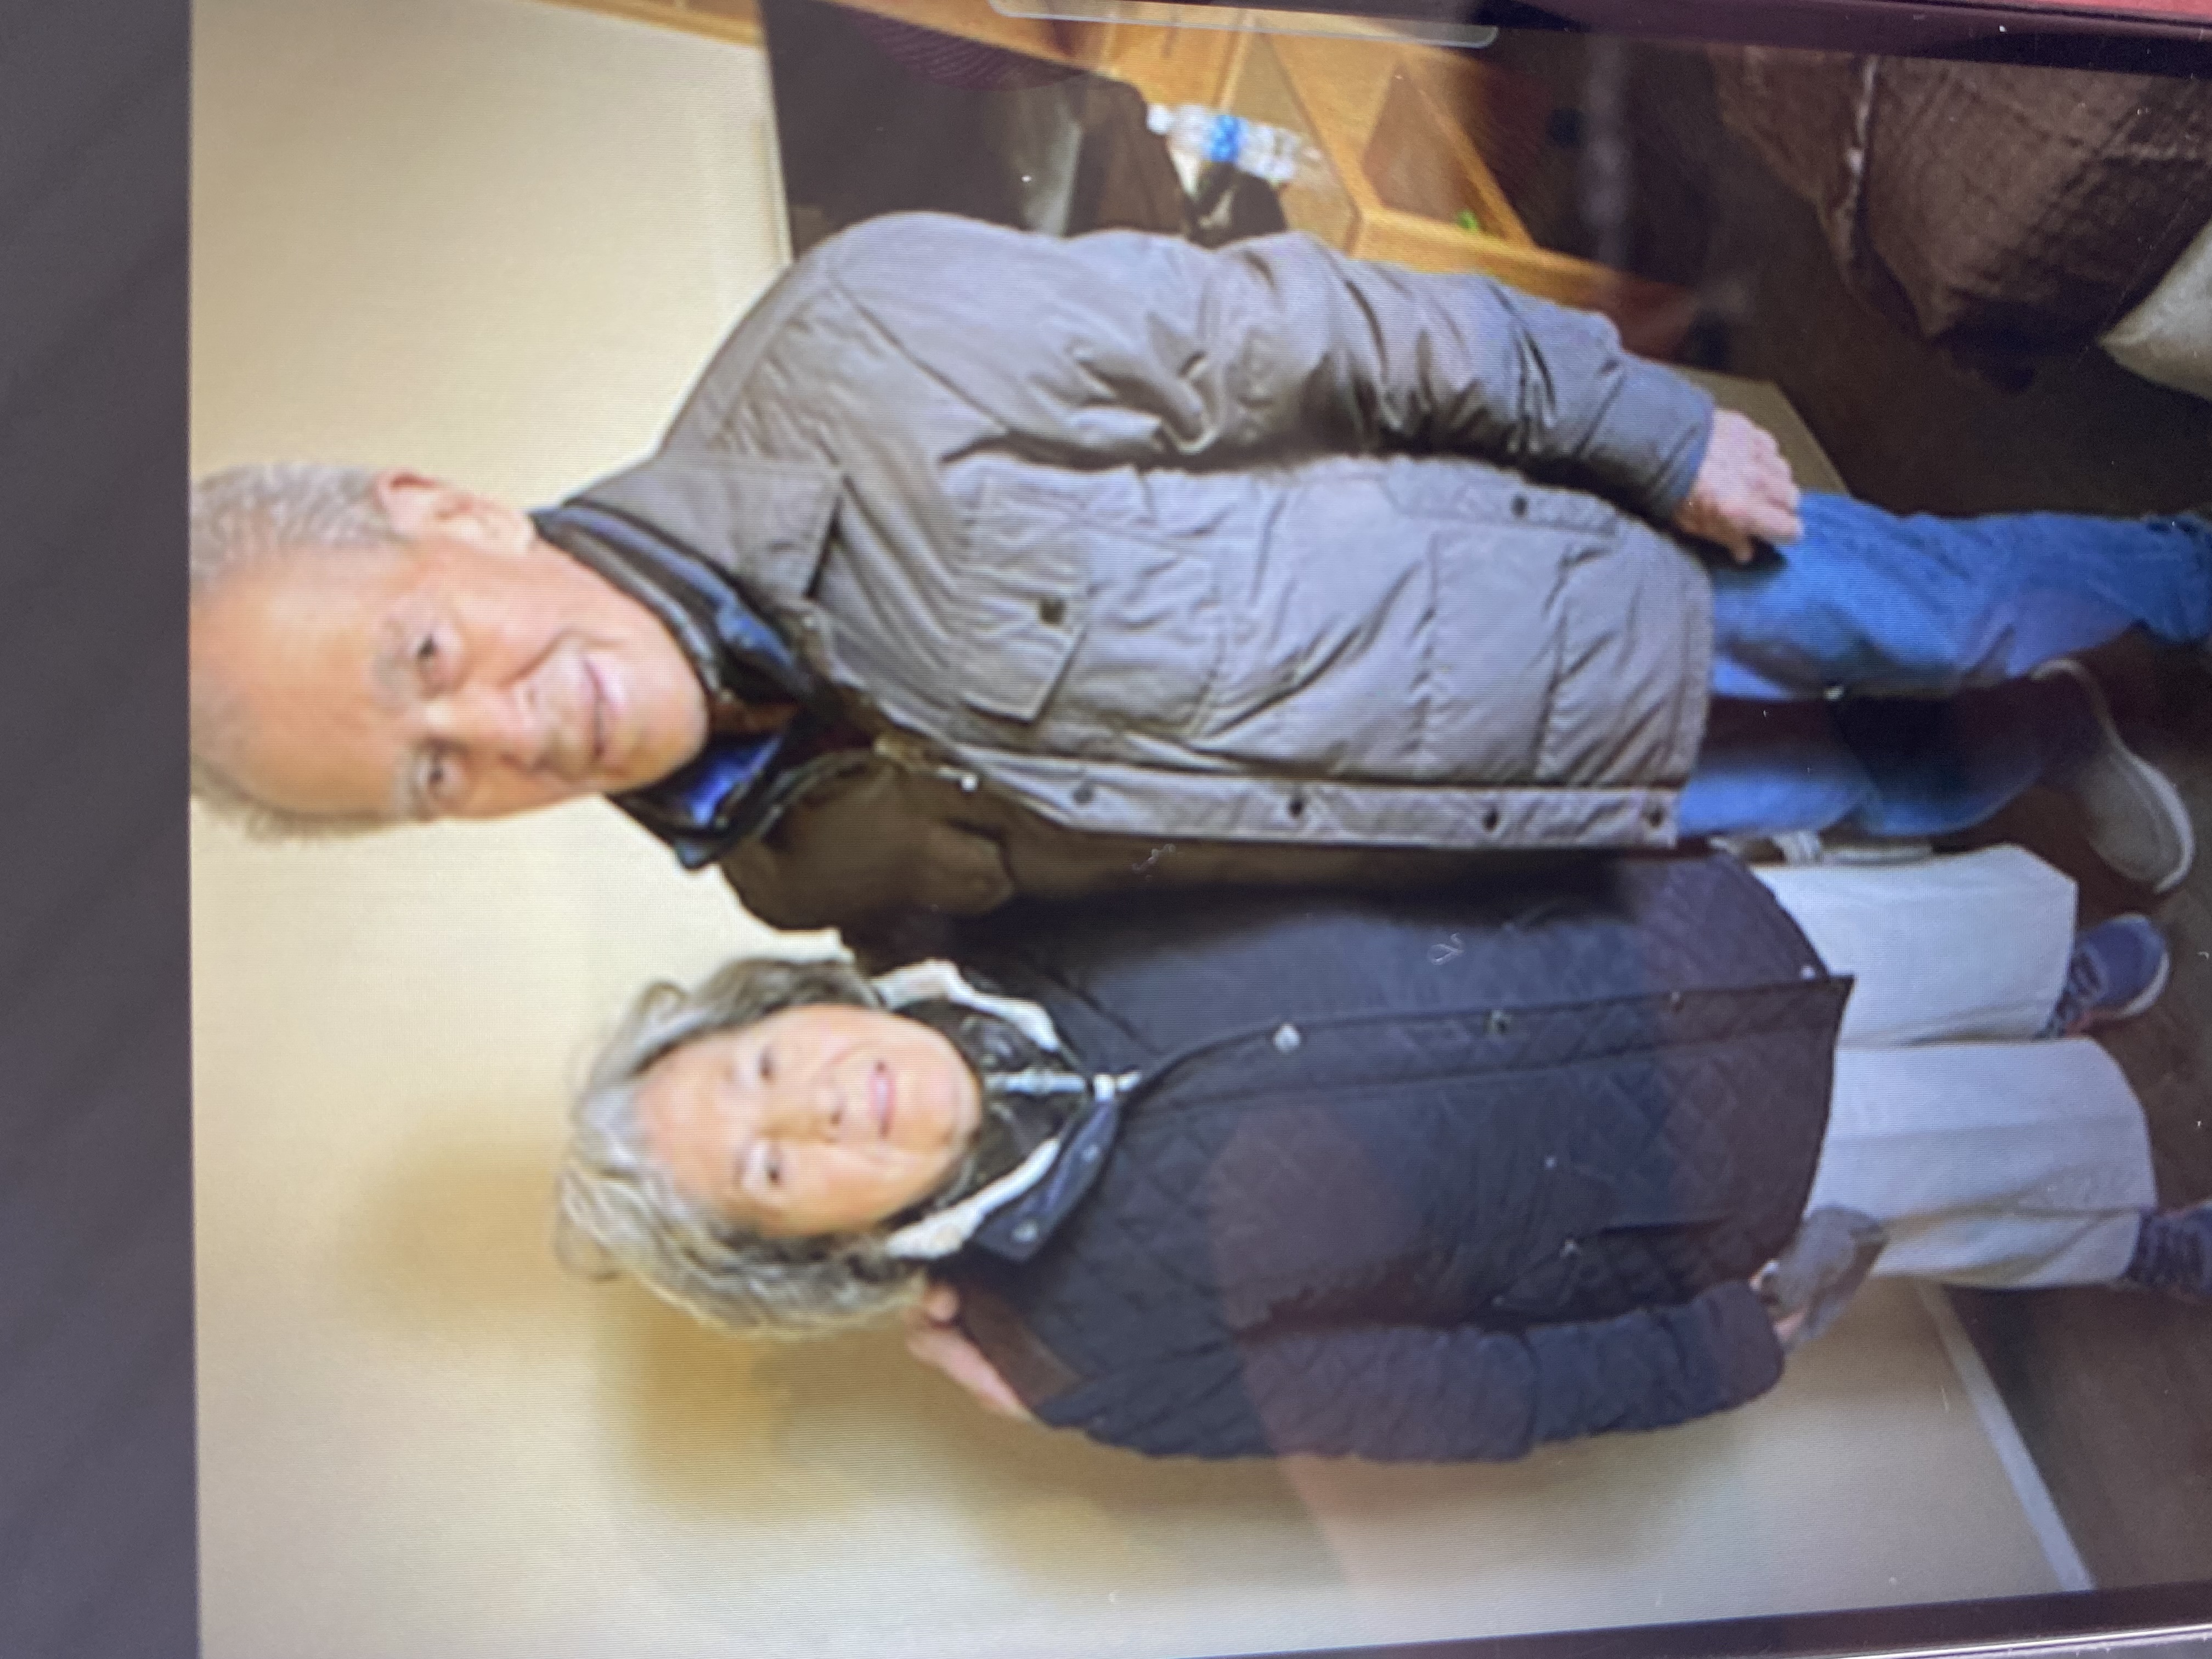 UPDATE: LOCATED SAFE: Deputies Searching For 2 Missing/Endangered With Alzheimer's Disease Image